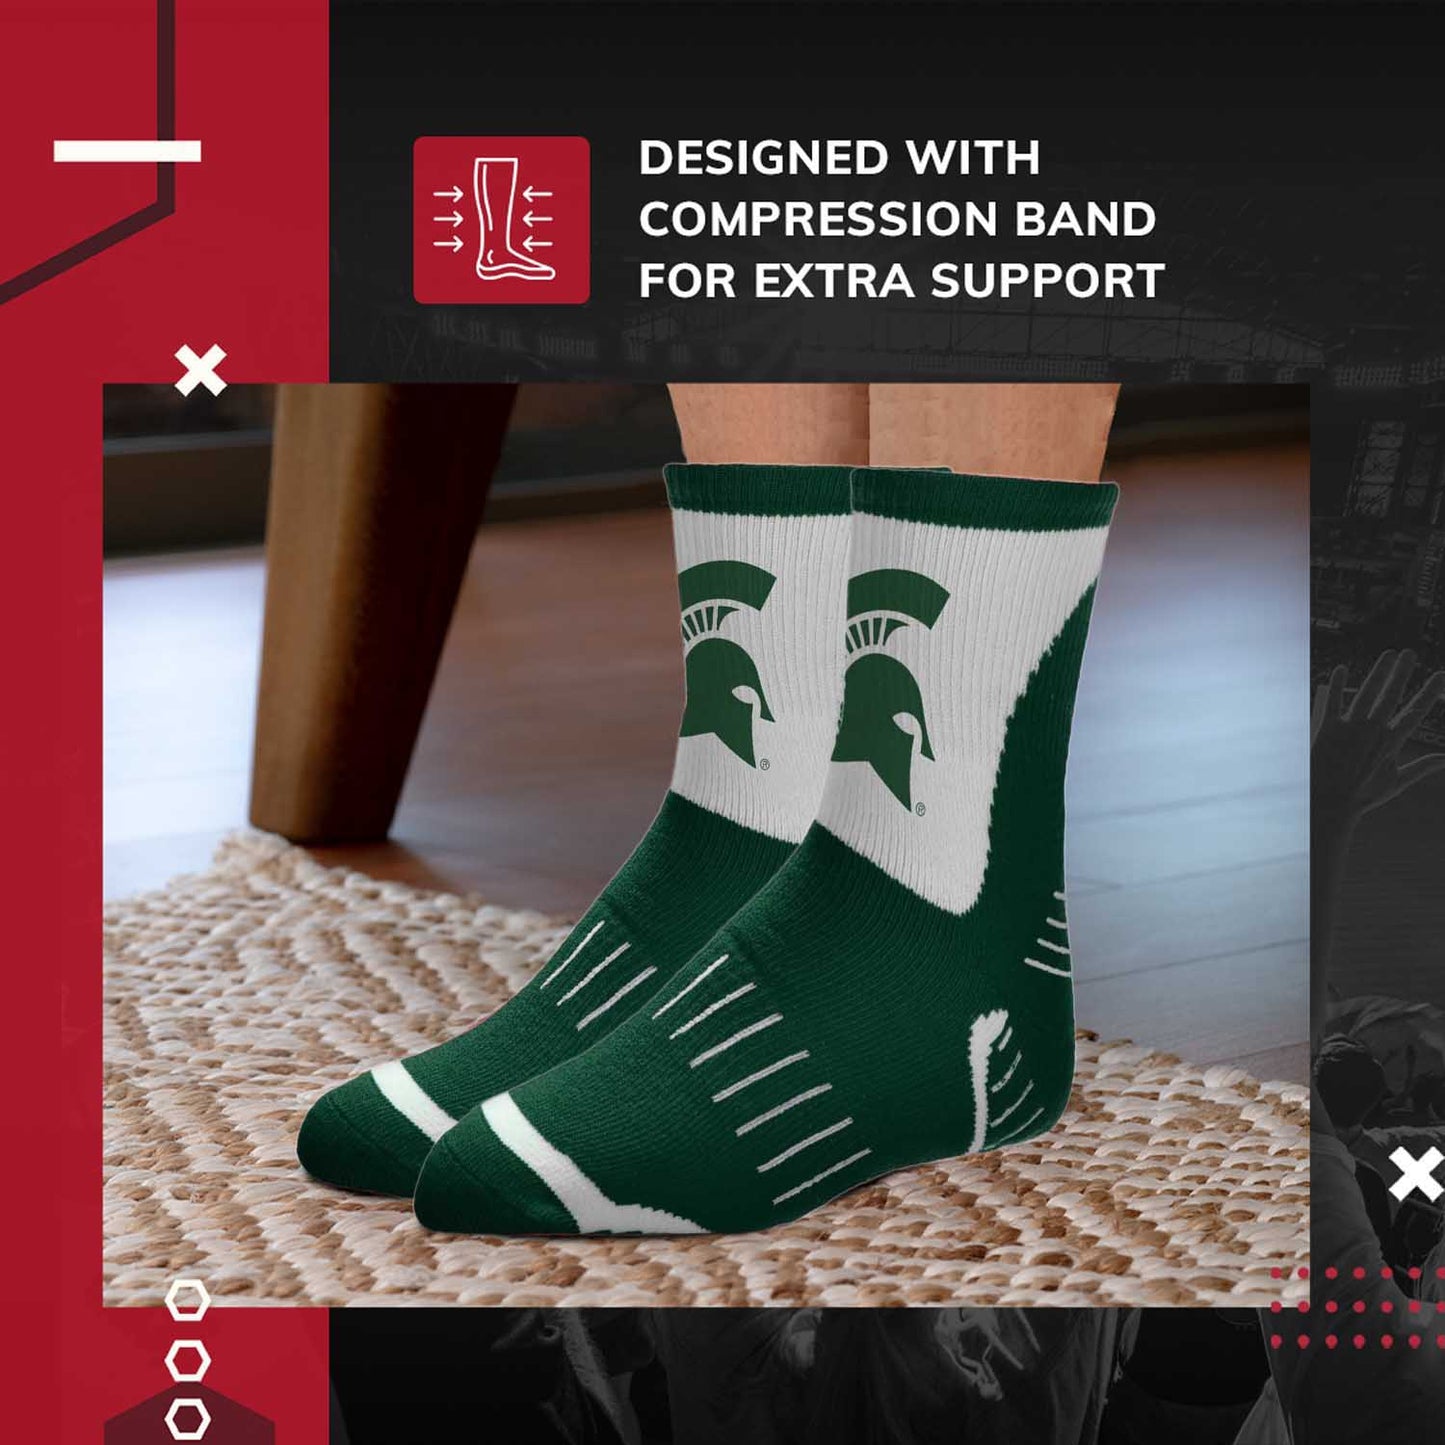 Michigan State Spartans NCAA Youth Surge Team Mascot Quarter Socks - Forest Green